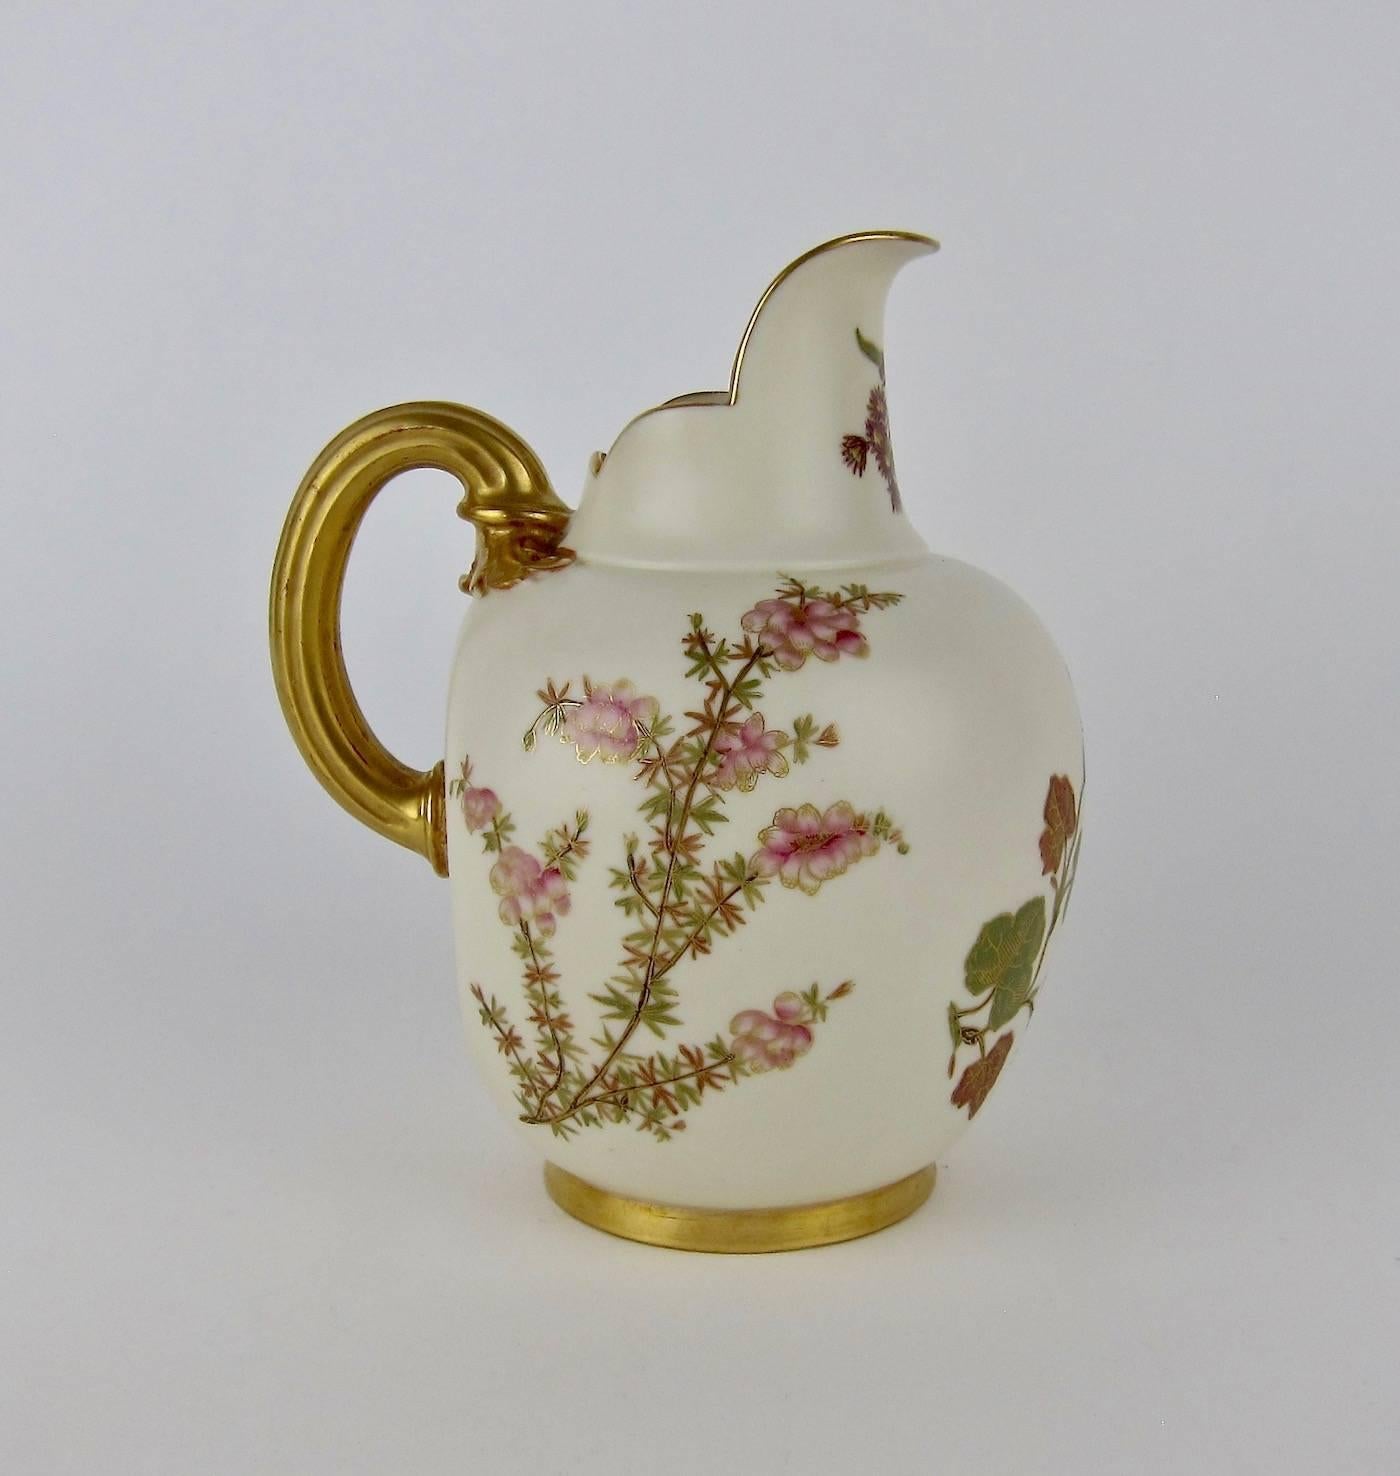 A fine late 19th century flat back pitcher in ivory porcelain by Royal Worcester of England, date marked for 1890. This exquisite antique pitcher is decorated with hand-painted Japanese floral motifs characteristic of Aesthetic Movement and